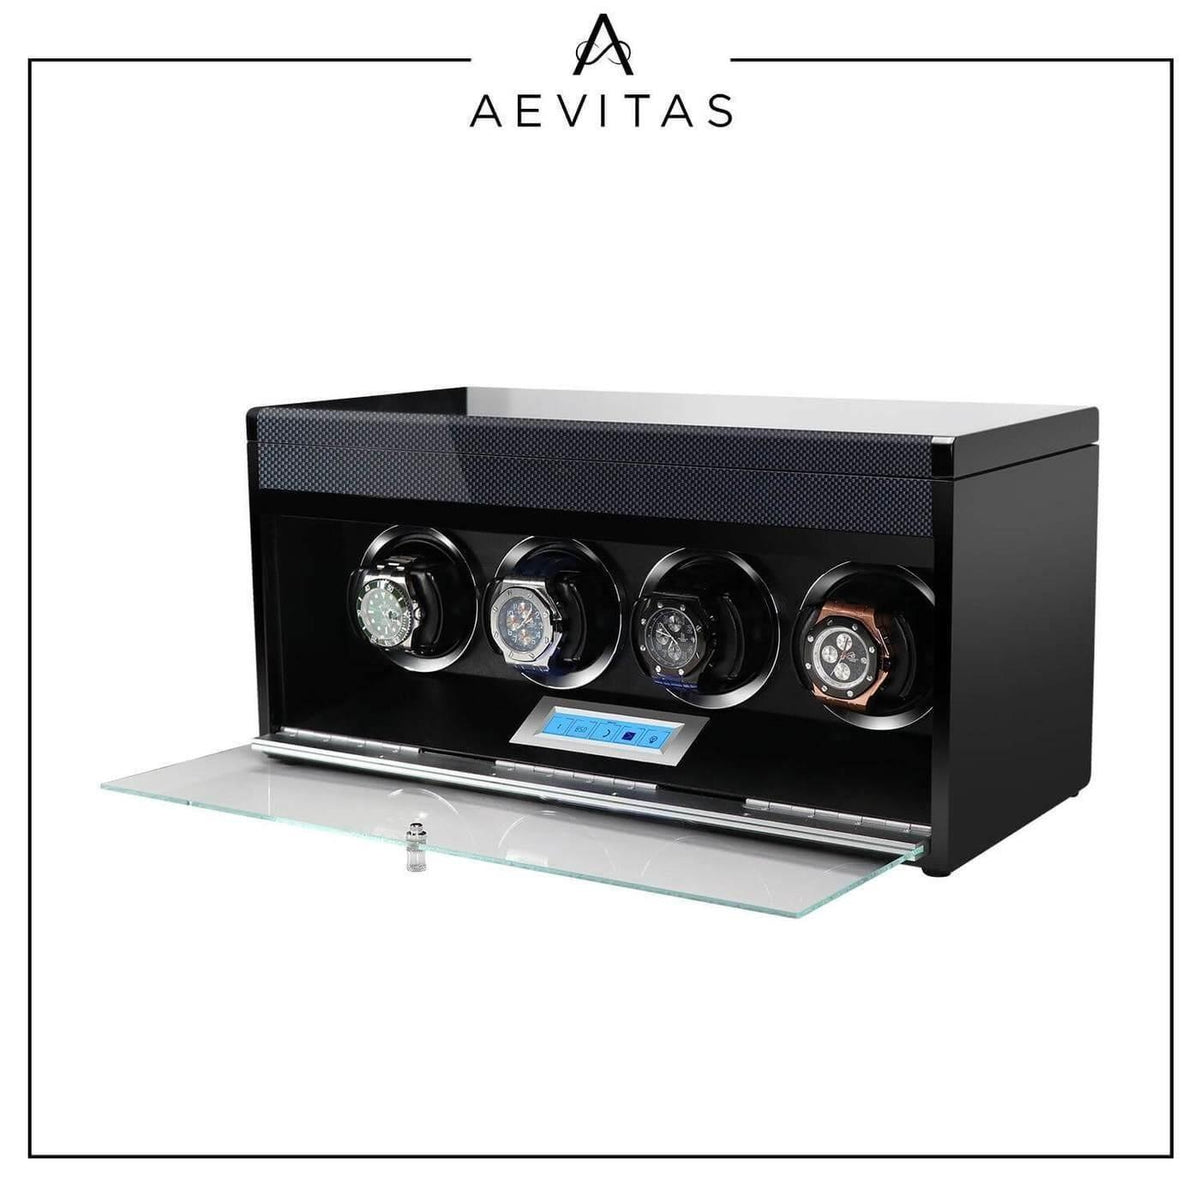 Automatic 4 Watch Winder in Carbon Fibre Finish by Aevitas